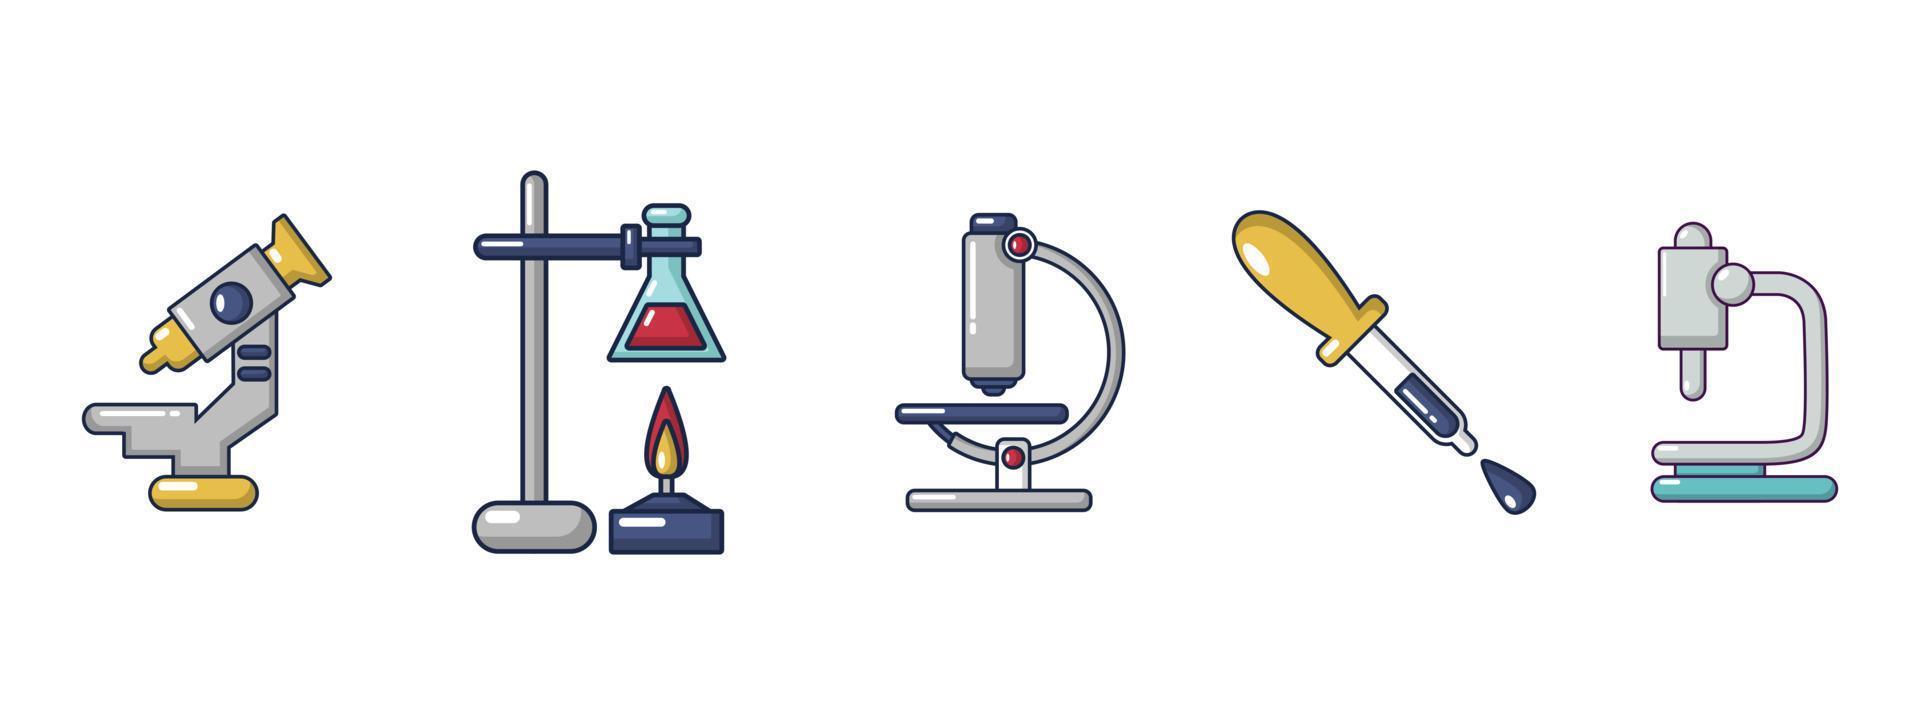 Chemical tools icon set, cartoon style vector